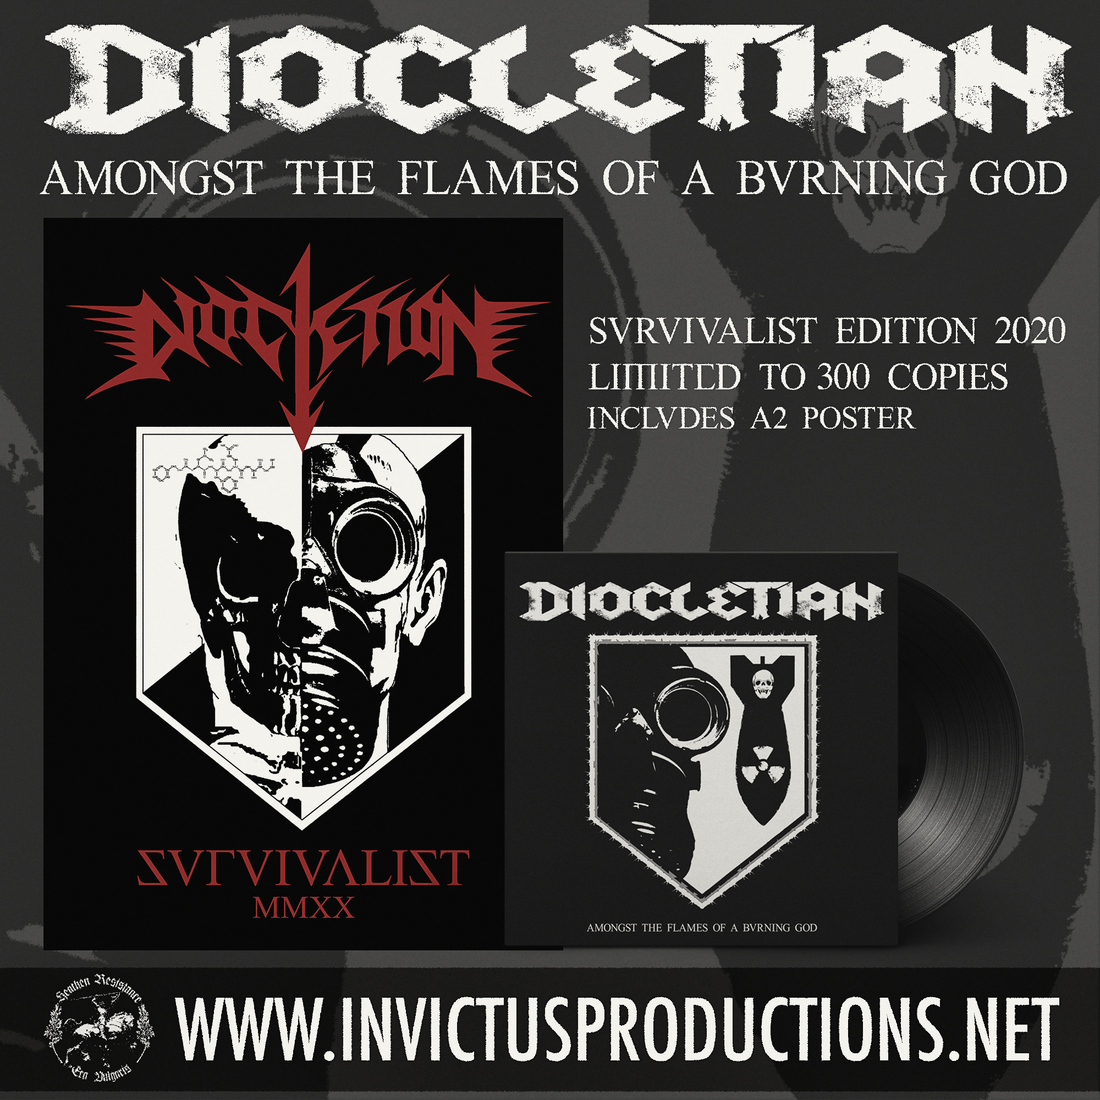 Out Now! Diocletian Amongst the Flames of a Burning God LP!